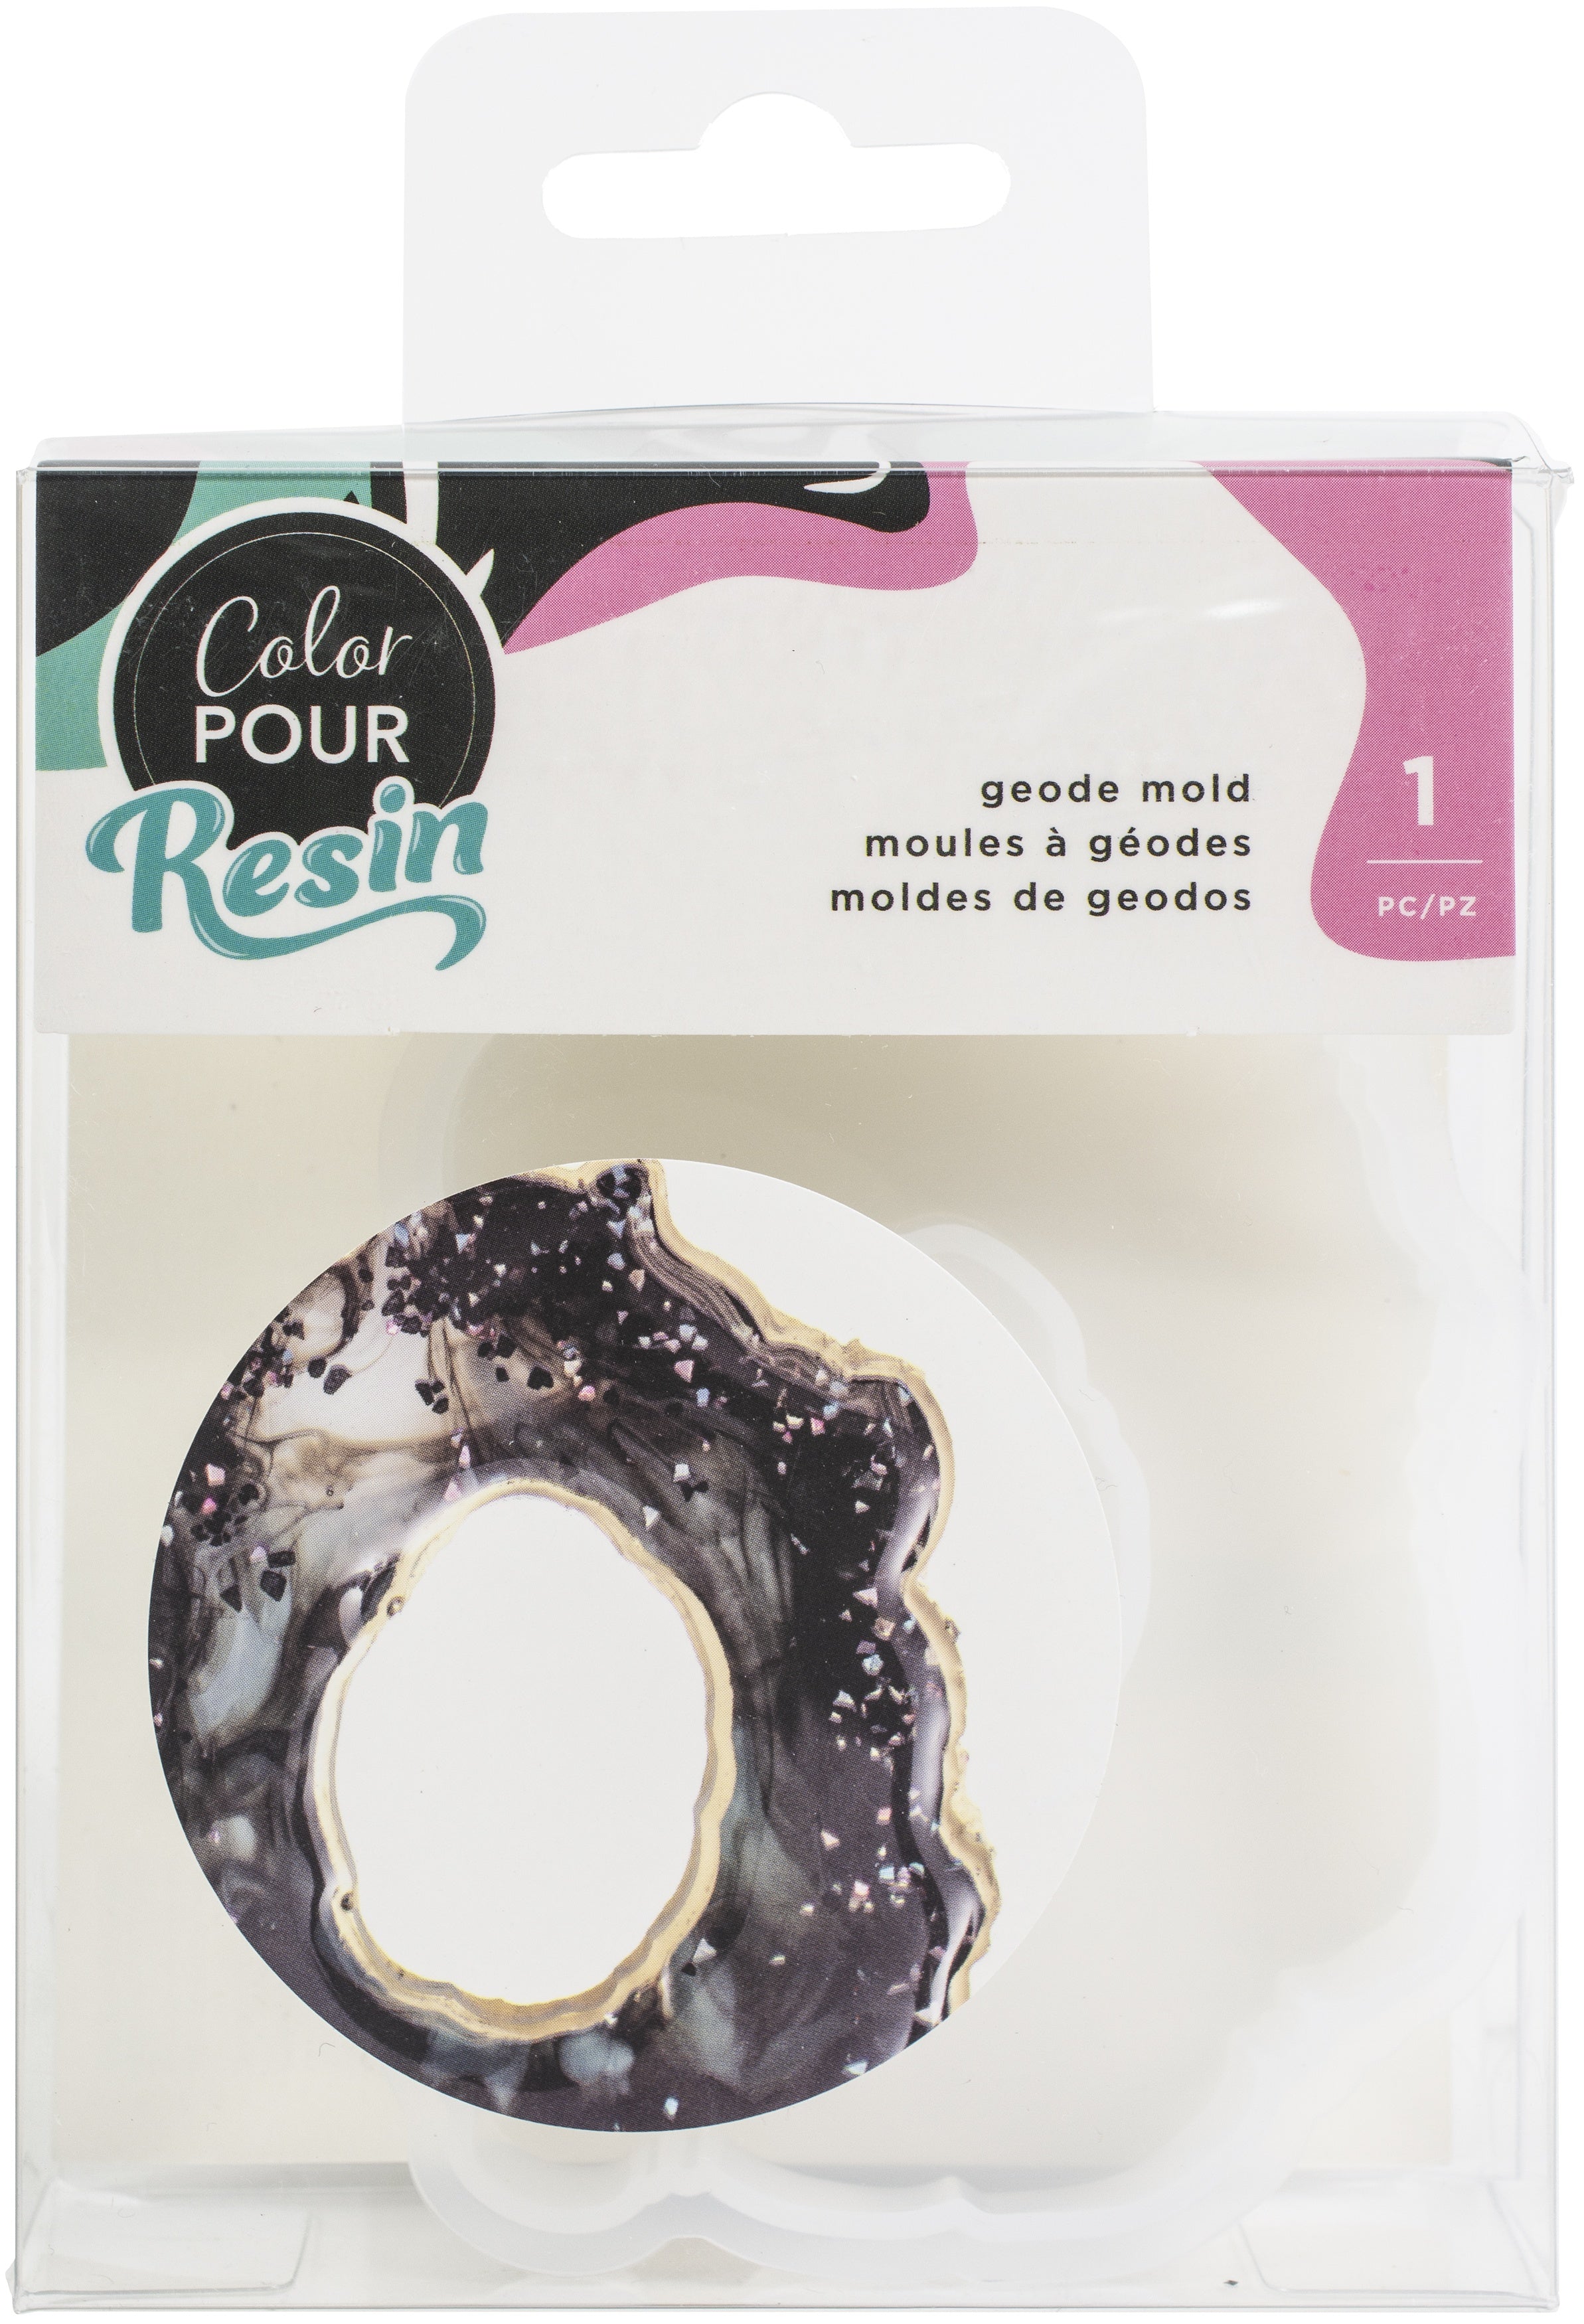 American Crafts Color Pour Resin Round Bead Mold | Michaels